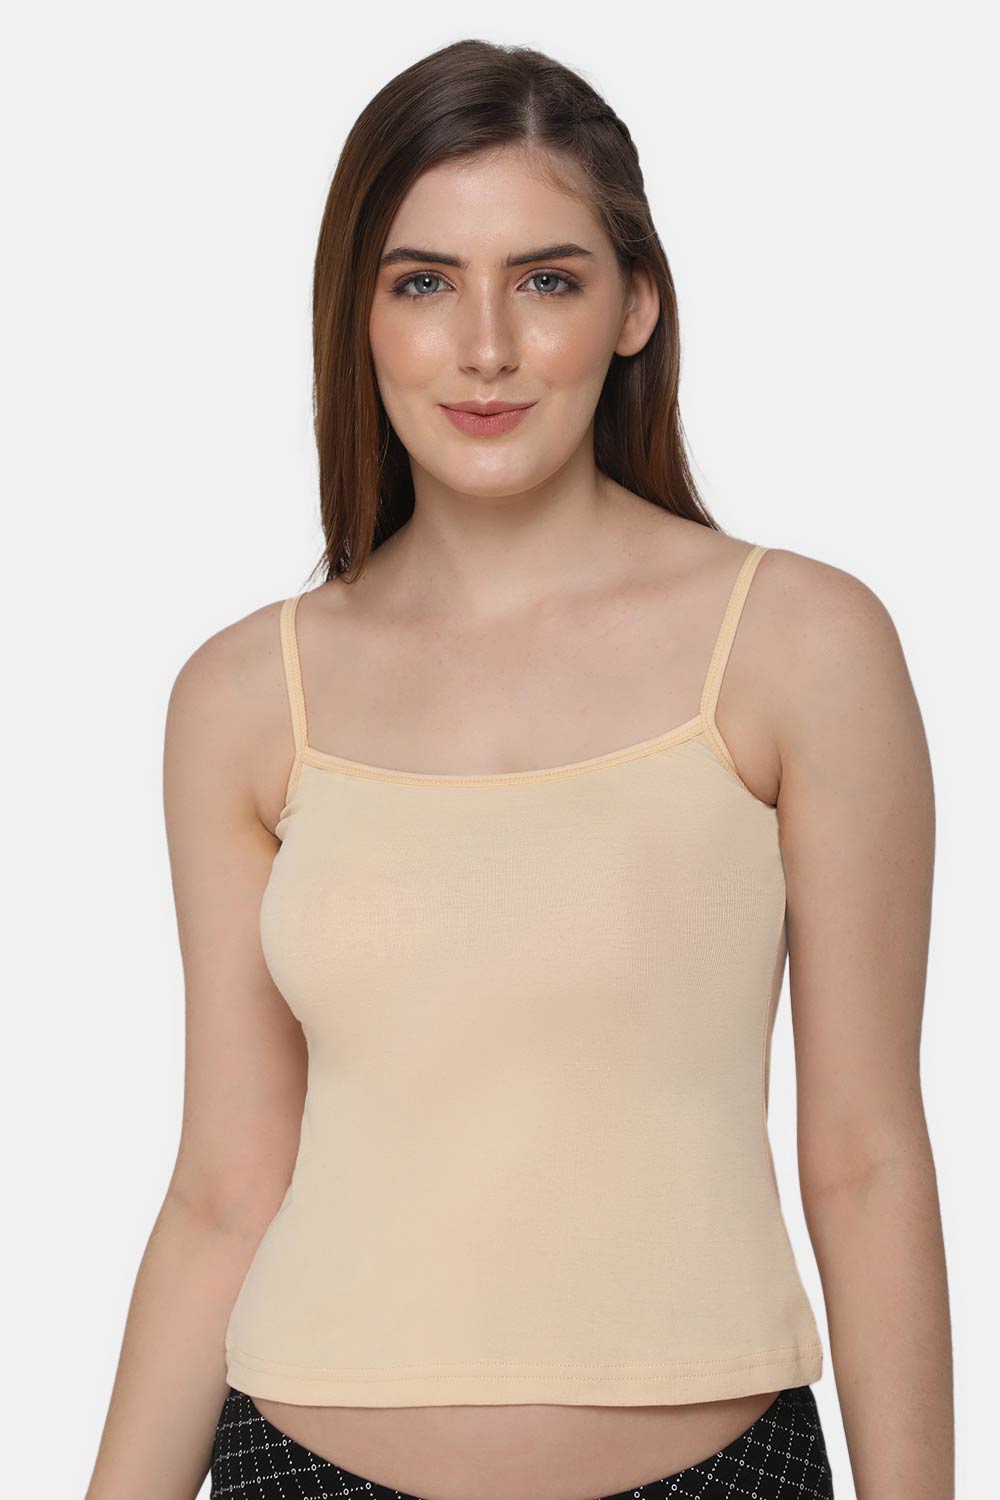 Intimacy Camisole-Slip Special Combo Pack - In02 - Pack of 3 - C63